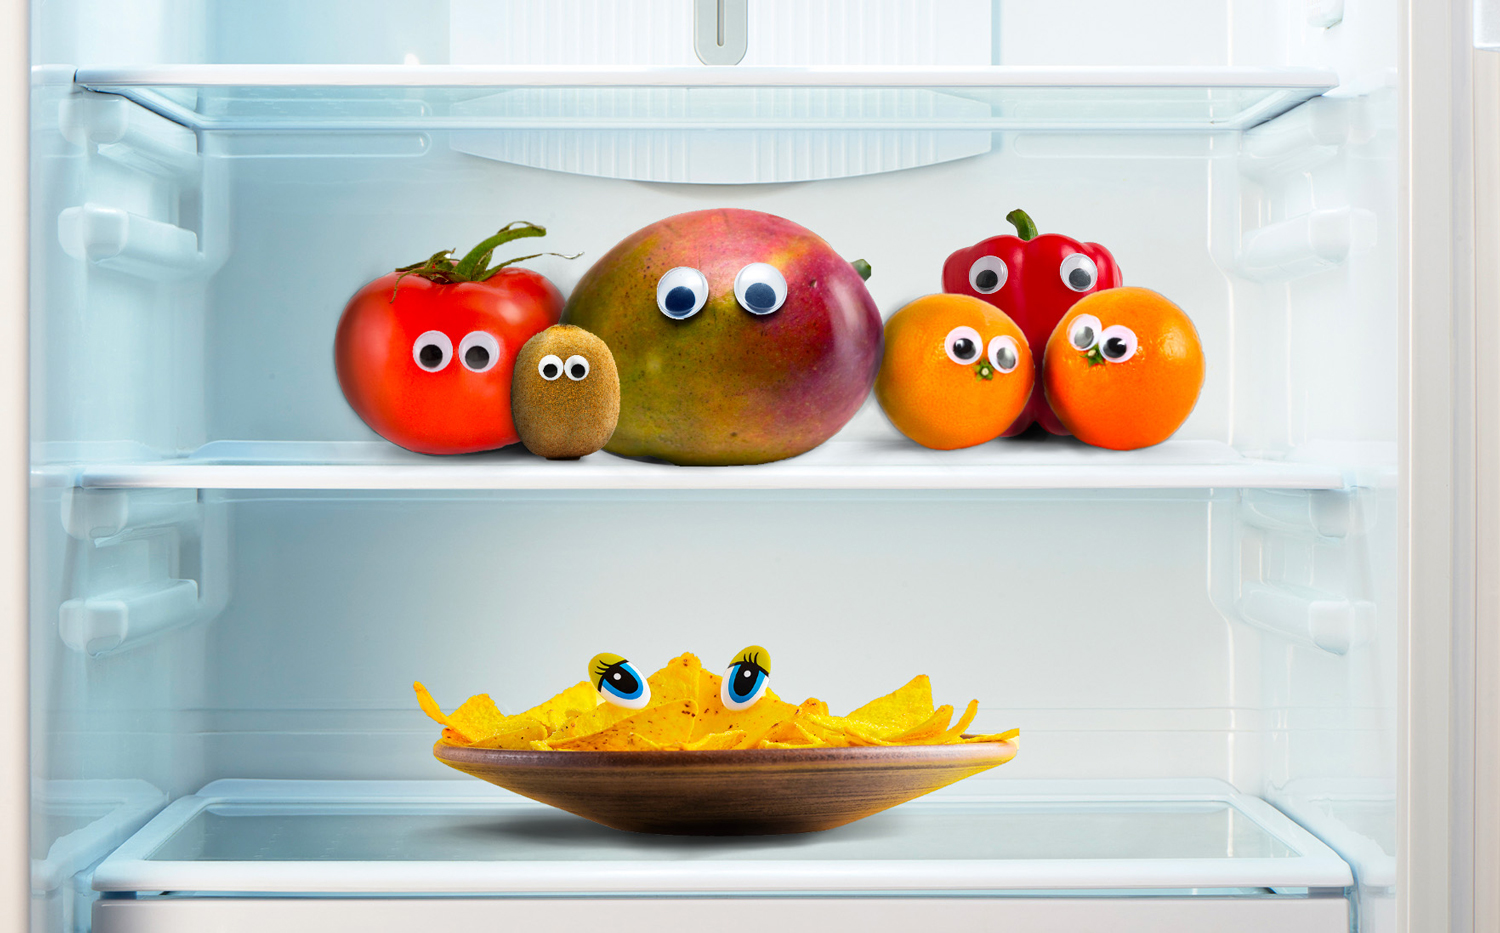 A refrigerator is full of food that has googly eyes stuck on it.